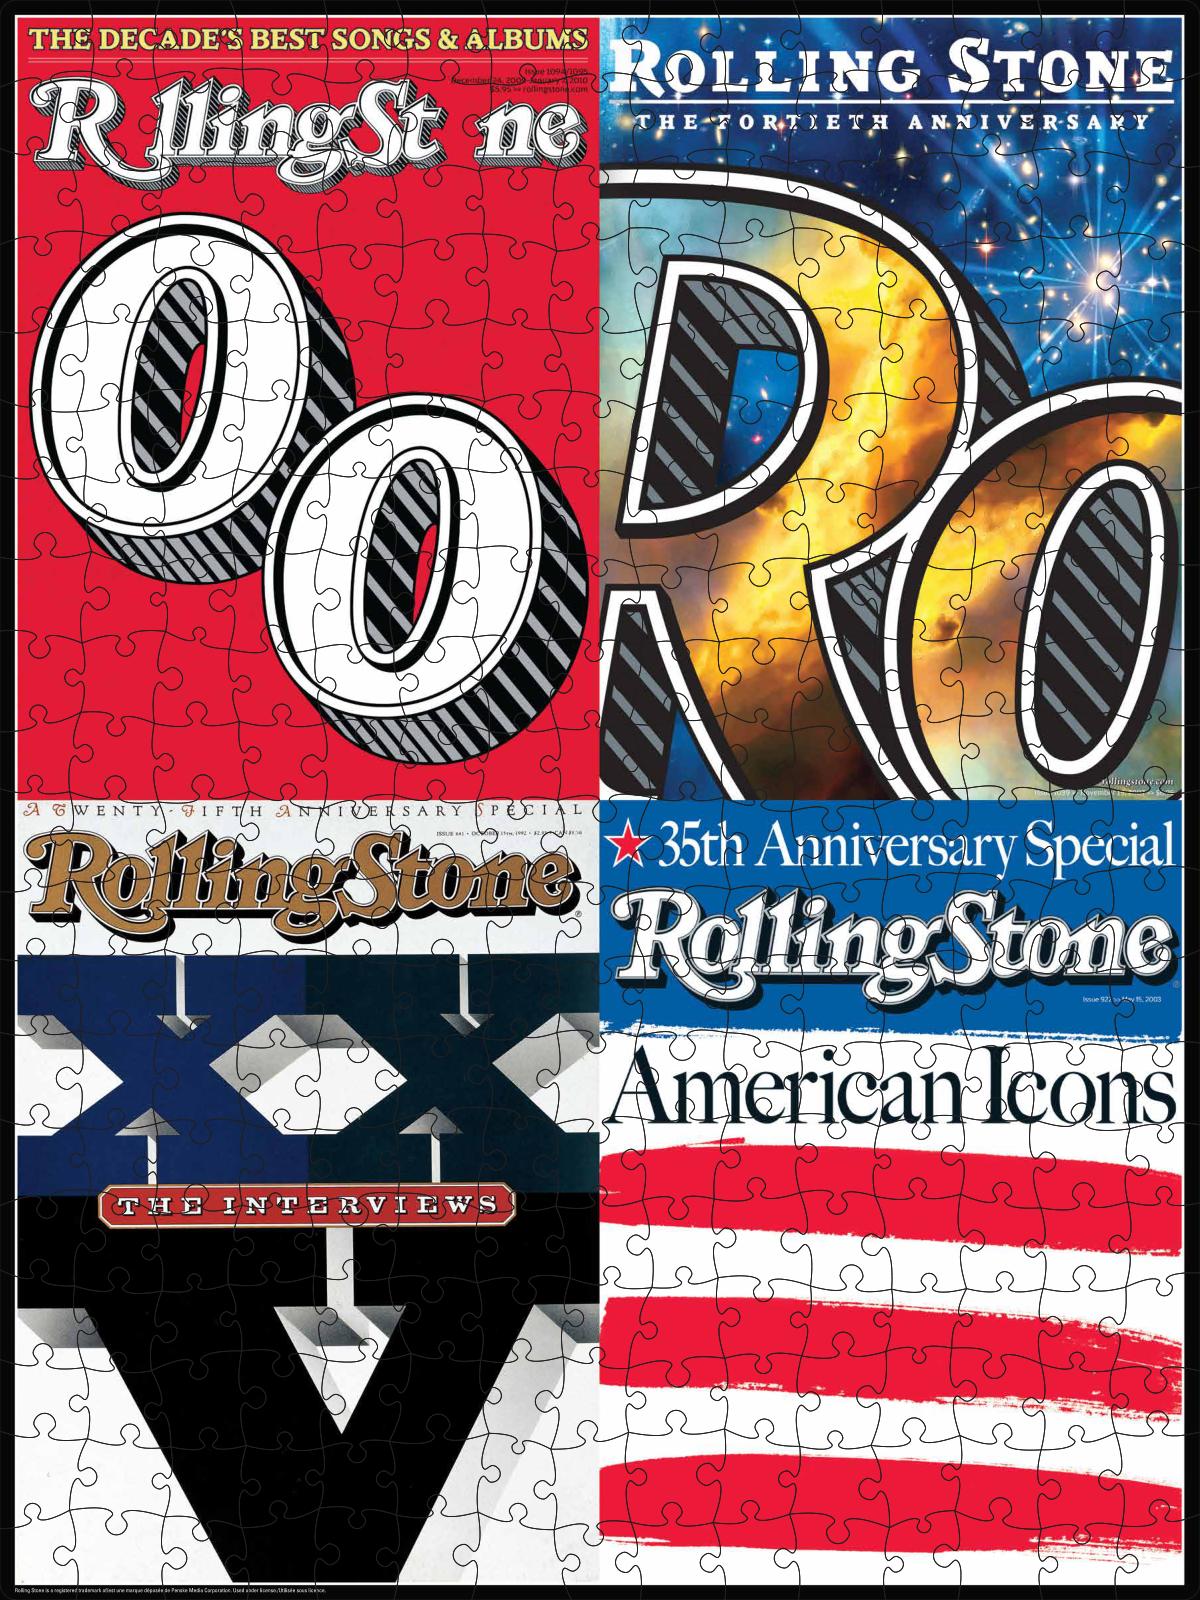 300-Piece Jigsaw Puzzle, Rolling Stone Magazine Covers - image 2 of 2